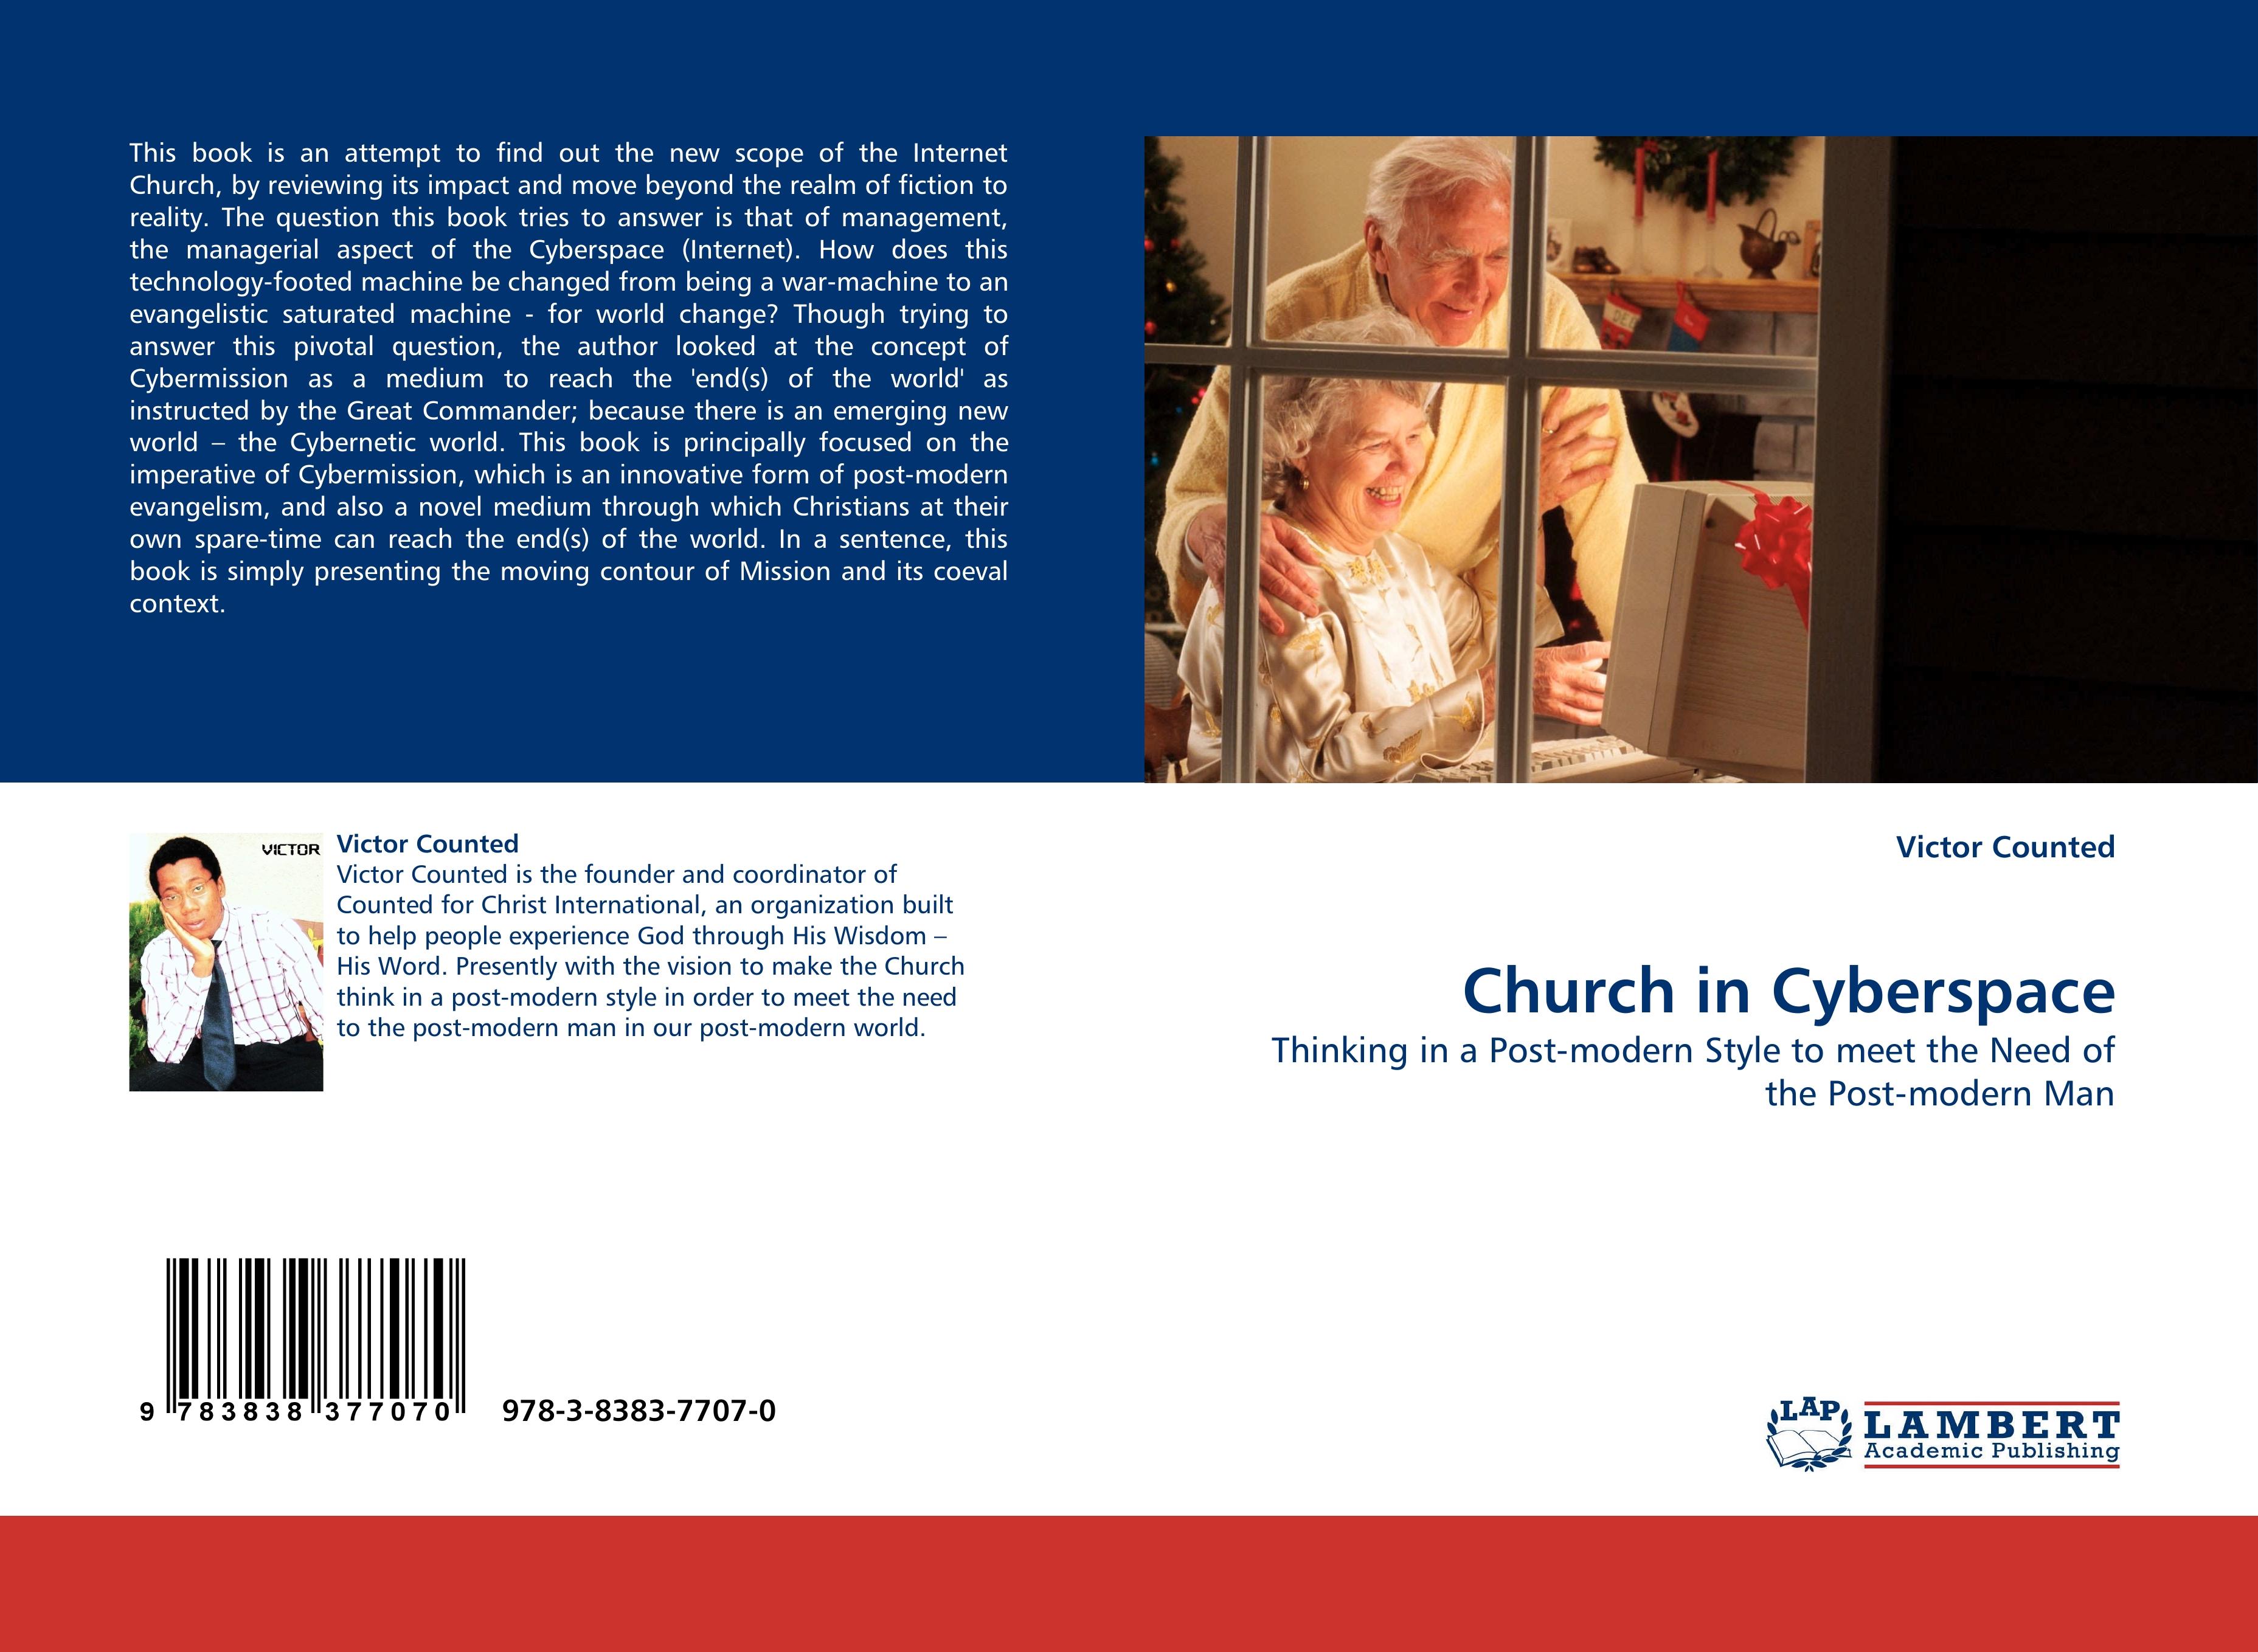 Church in Cyberspace / Thinking in a Post-modern Style to meet the Need of the Post-modern Man / Victor Counted / Taschenbuch / Paperback / 72 S. / Englisch / 2010 / LAP LAMBERT Academic Publishing - Counted, Victor